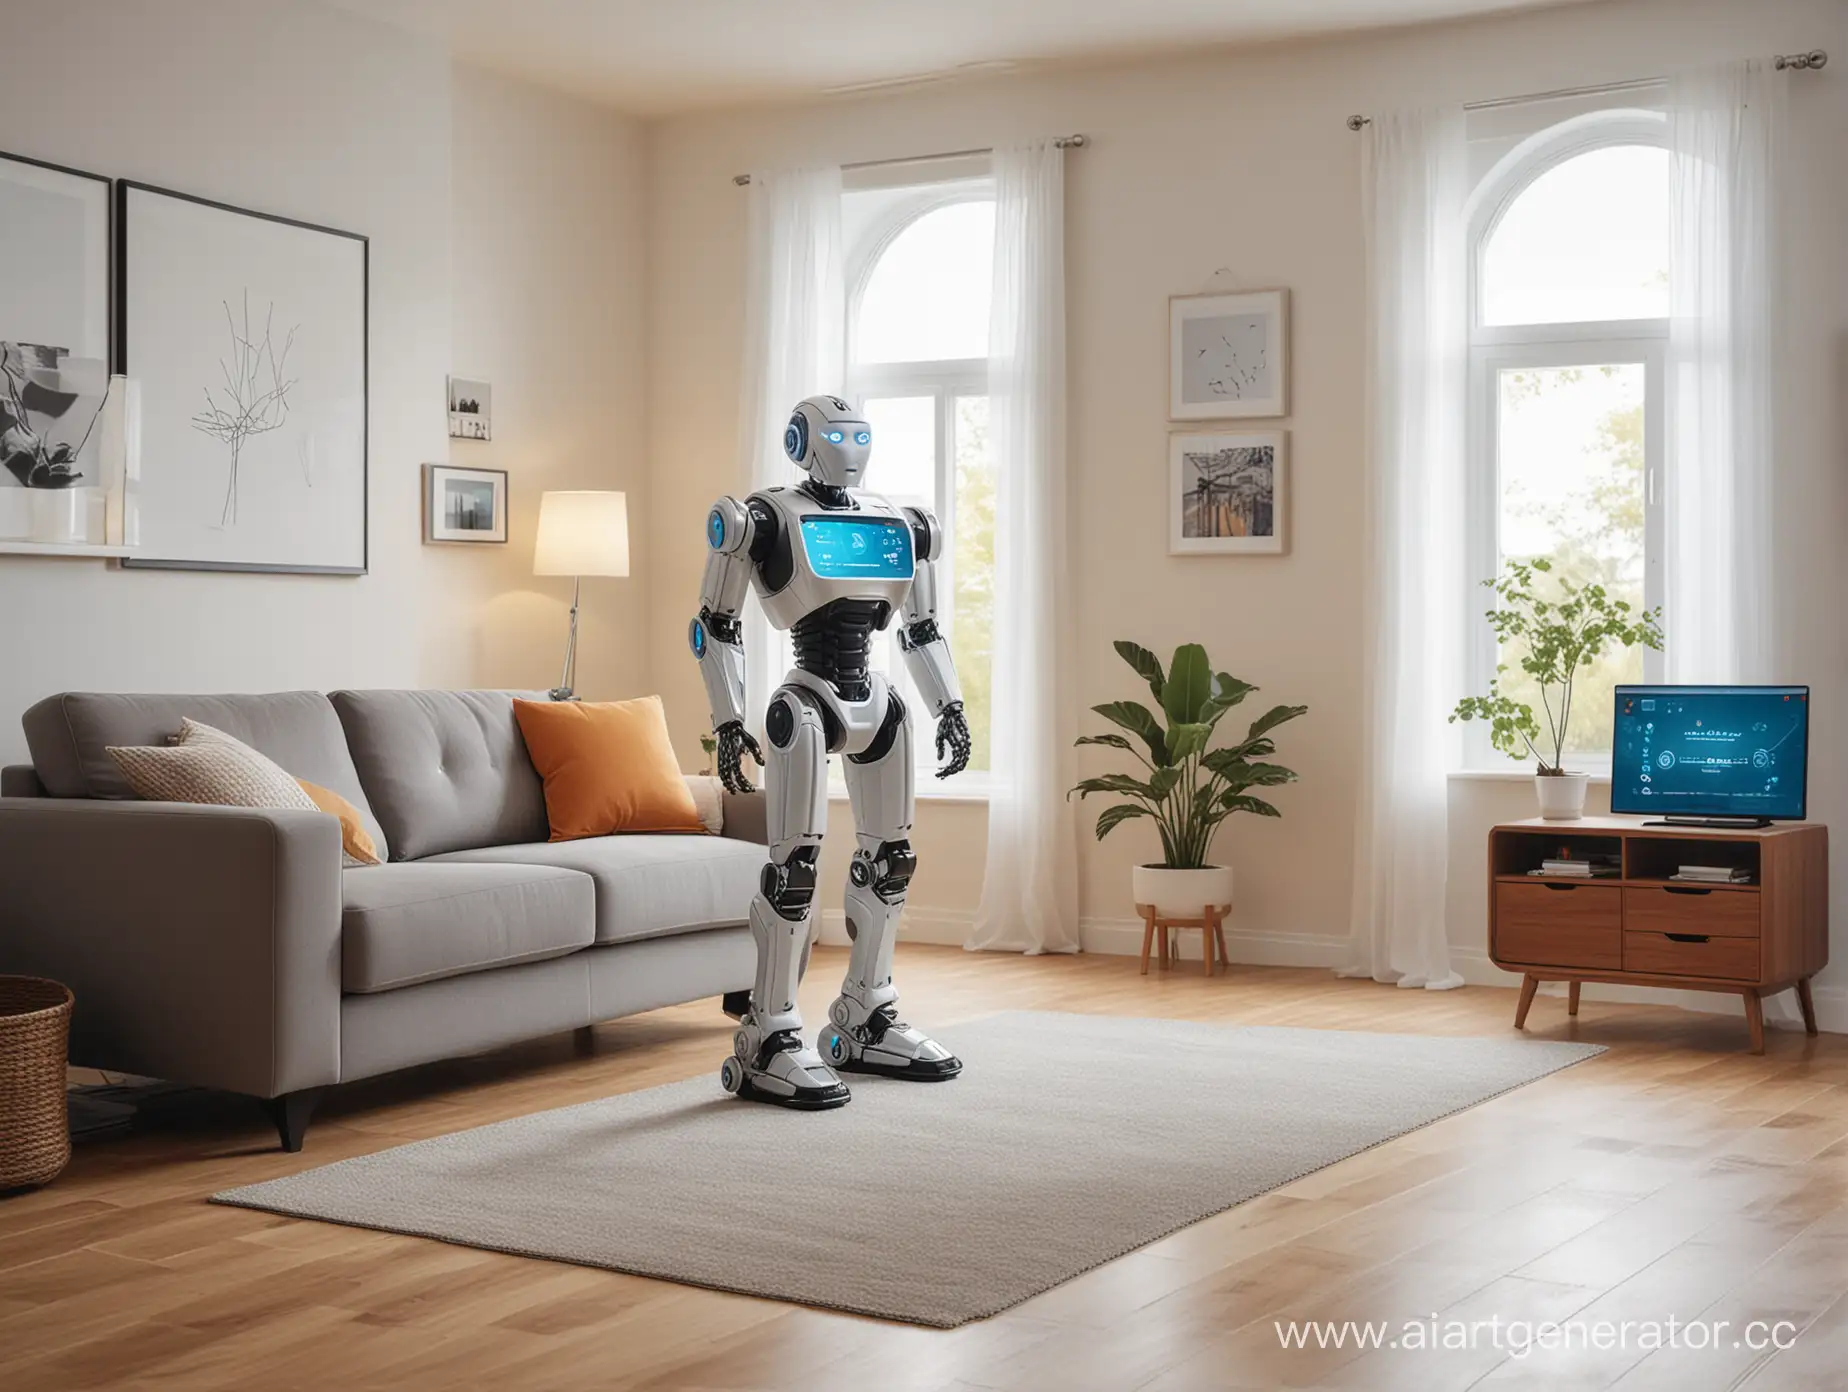 Futuristic-Living-RobotAssisted-Household-Chores-in-a-Modern-Living-Room